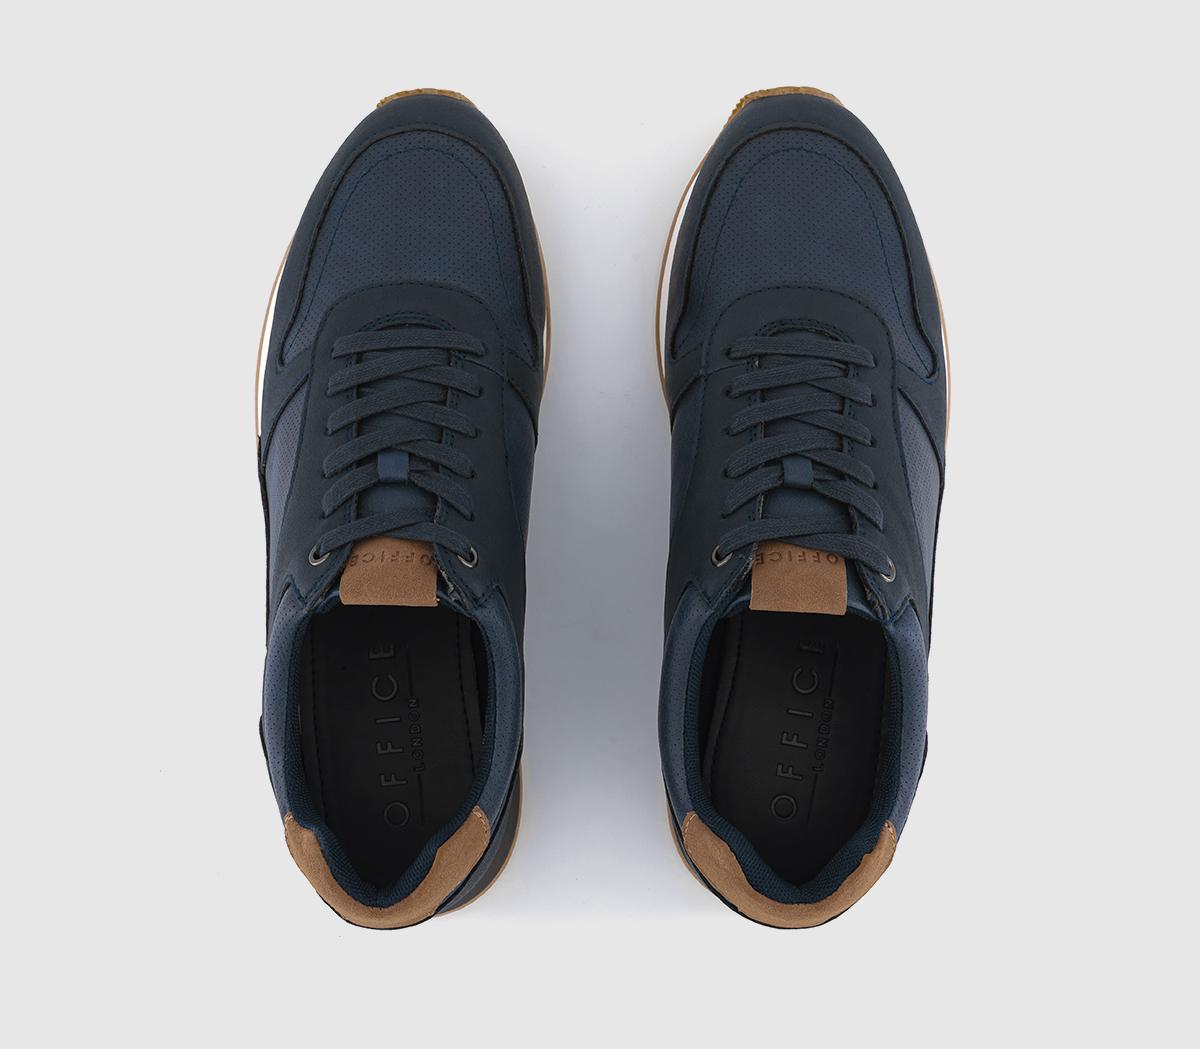 OFFICE Cassidy Lightweight Trainers Navy - Men's Casual Shoes